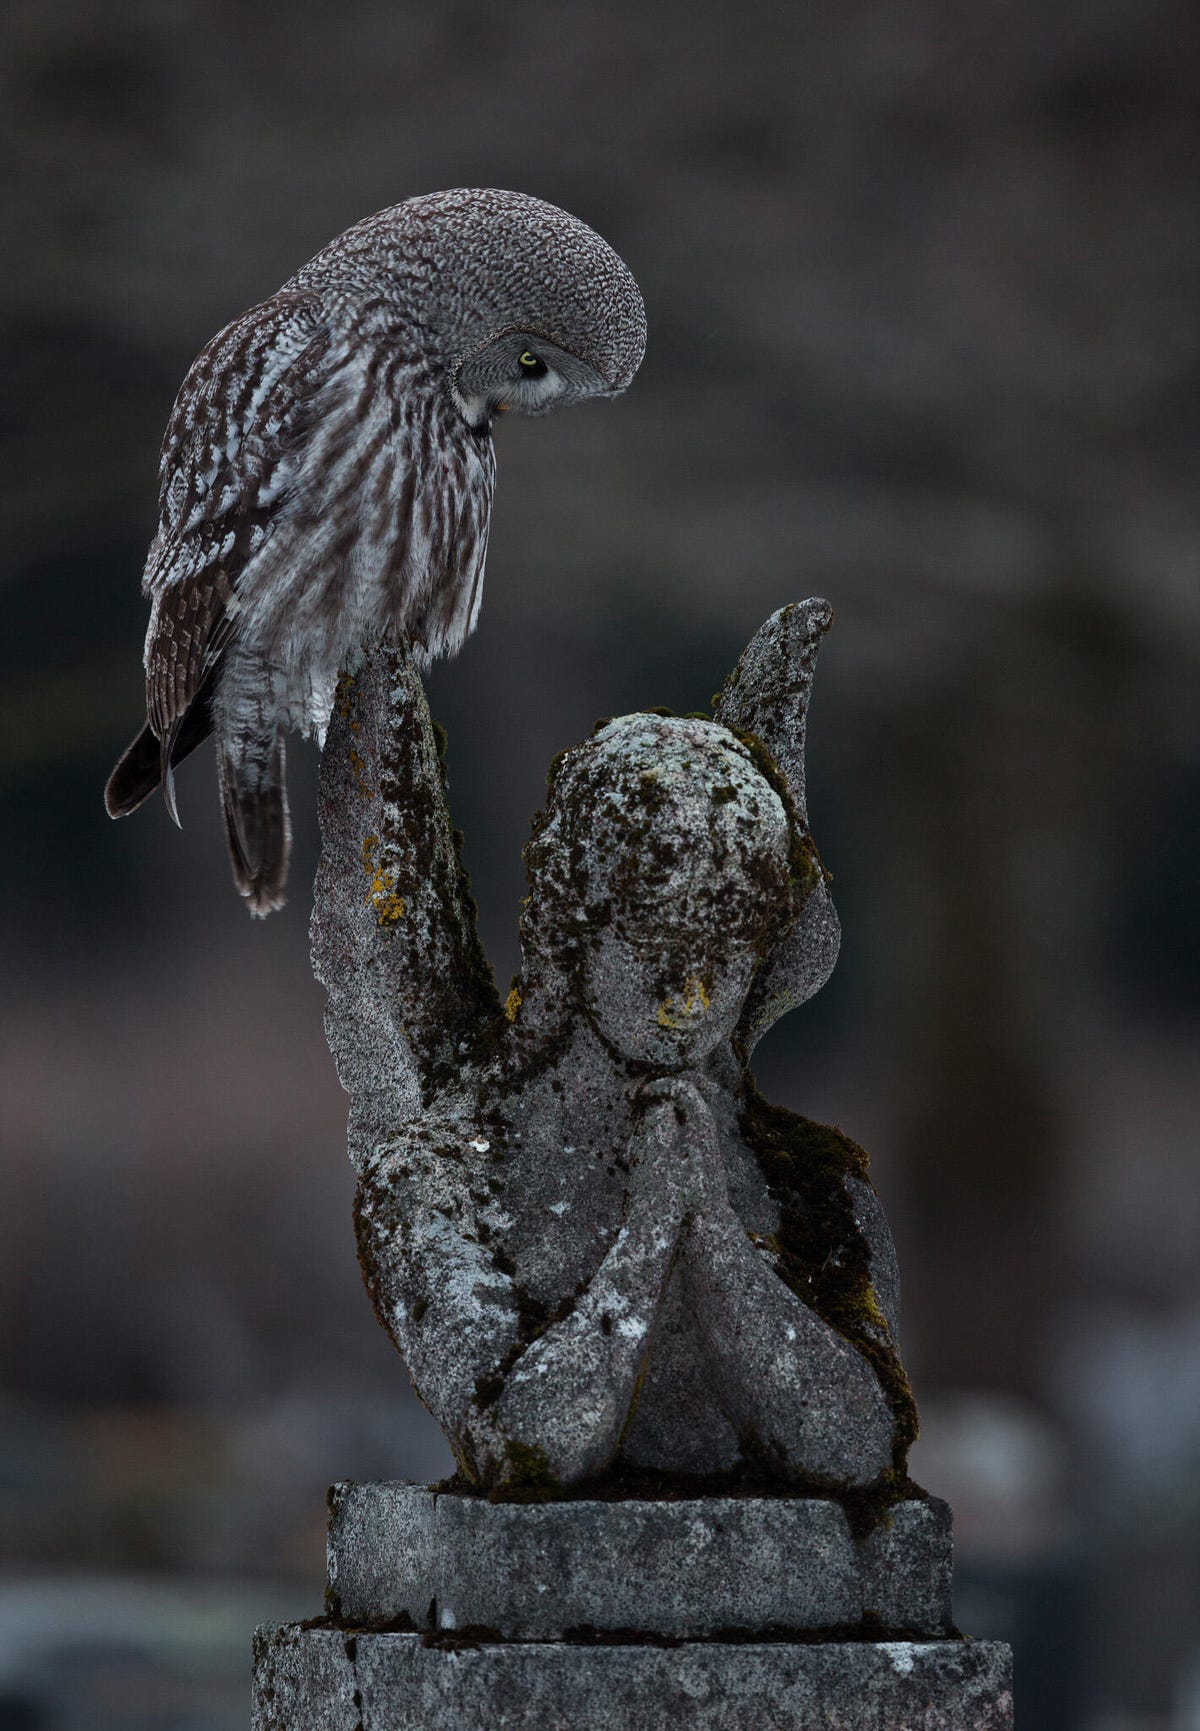 Great grey owl perches on the wing of an angel statue in a cemetery.